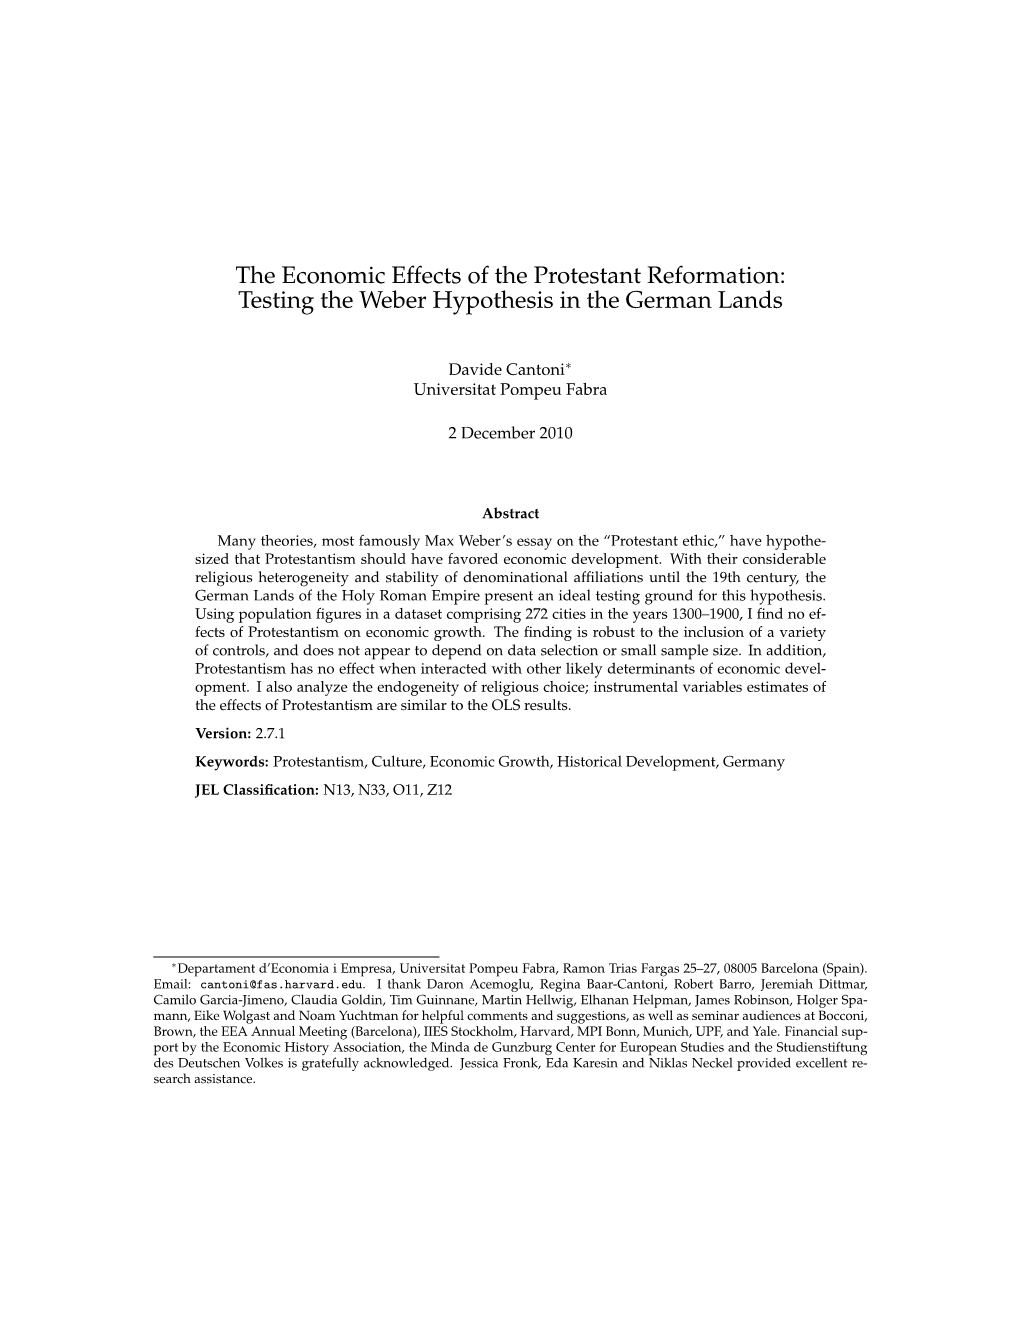 The Economic Effects of the Protestant Reformation: Testing the Weber Hypothesis in the German Lands